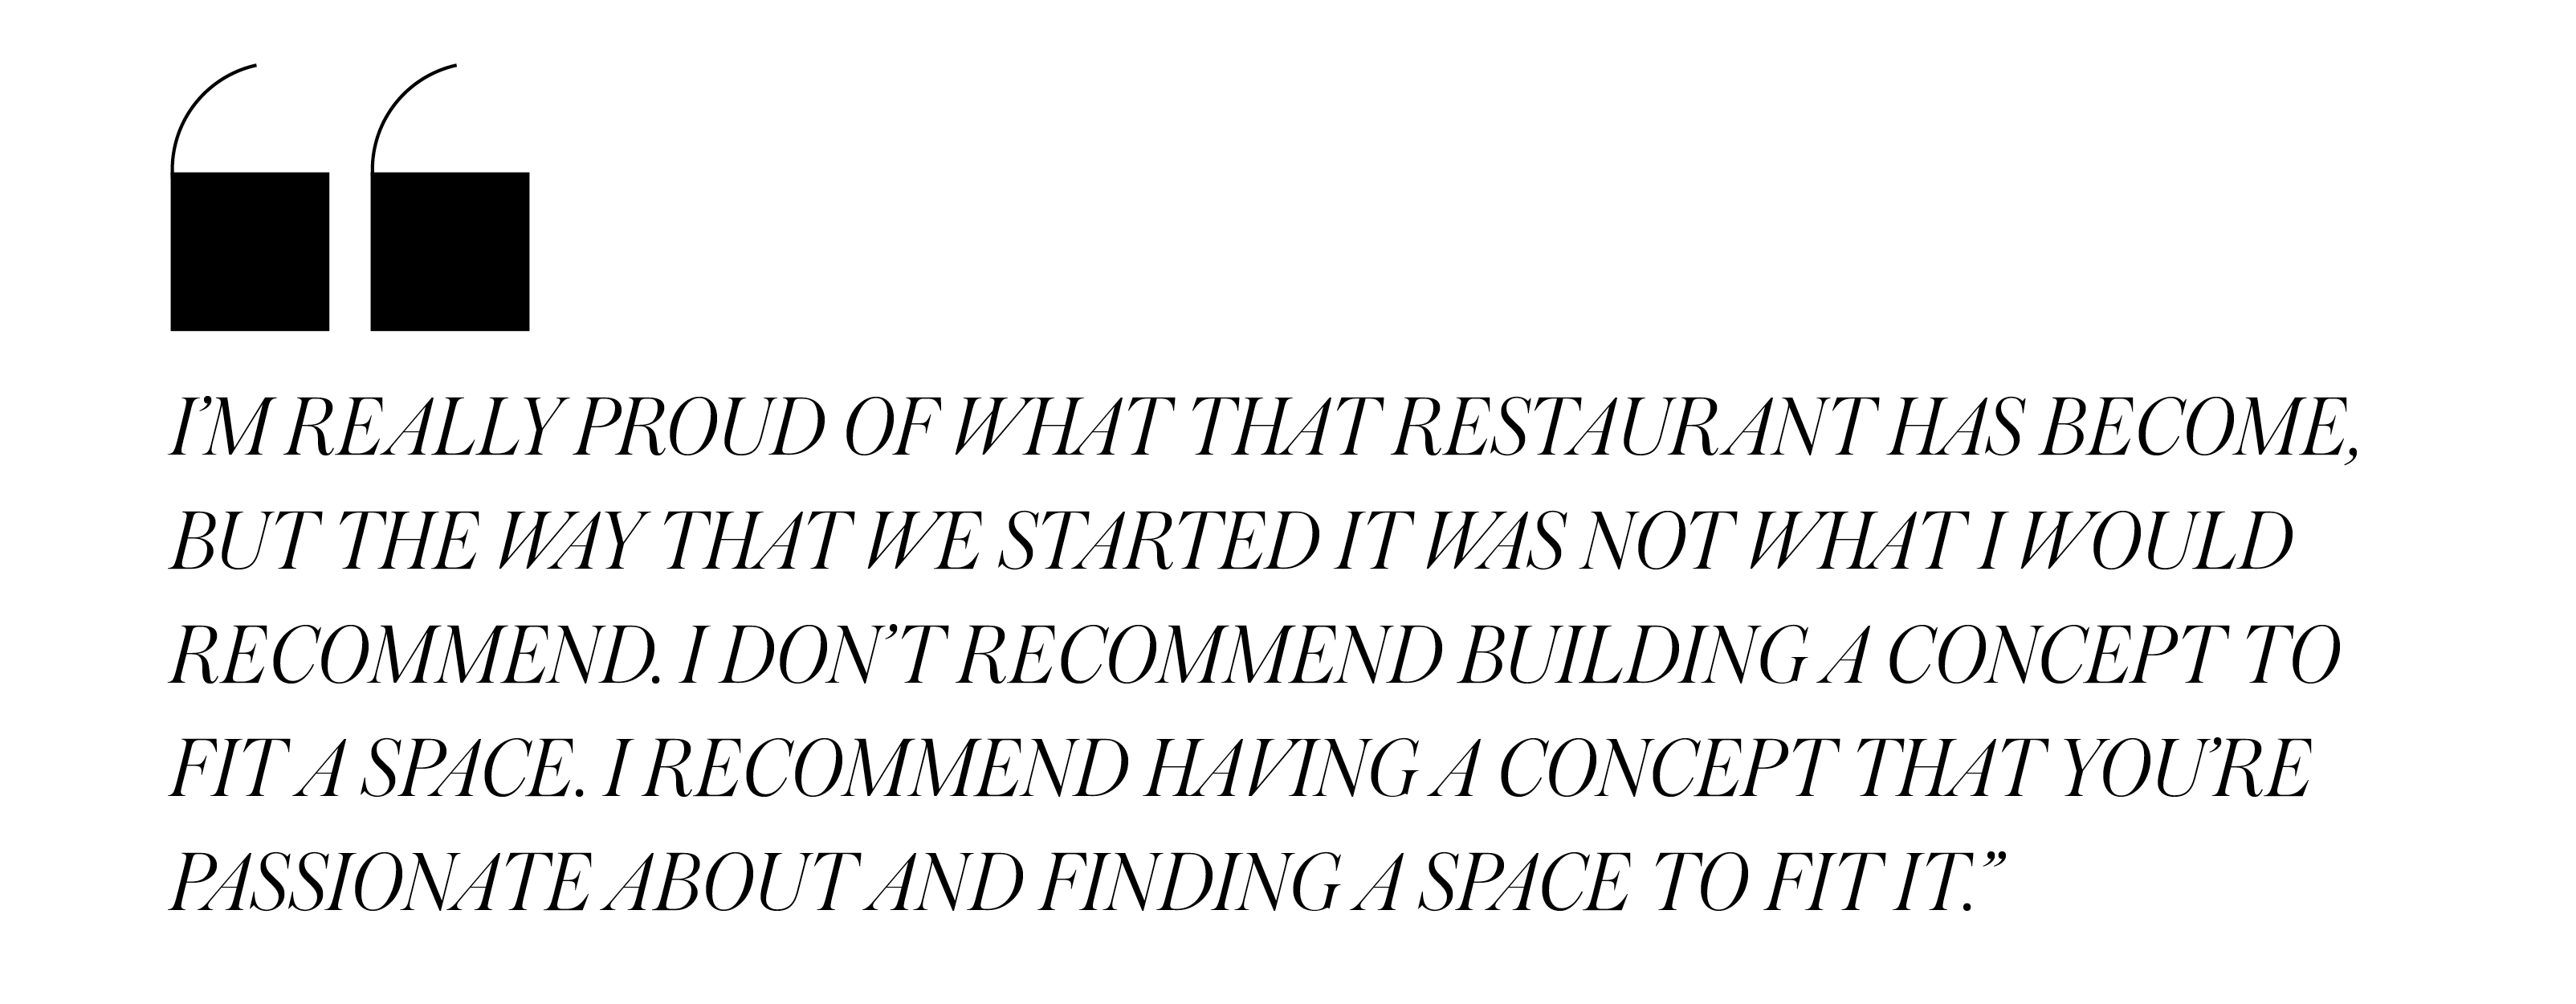 84 Hospitality pull quote